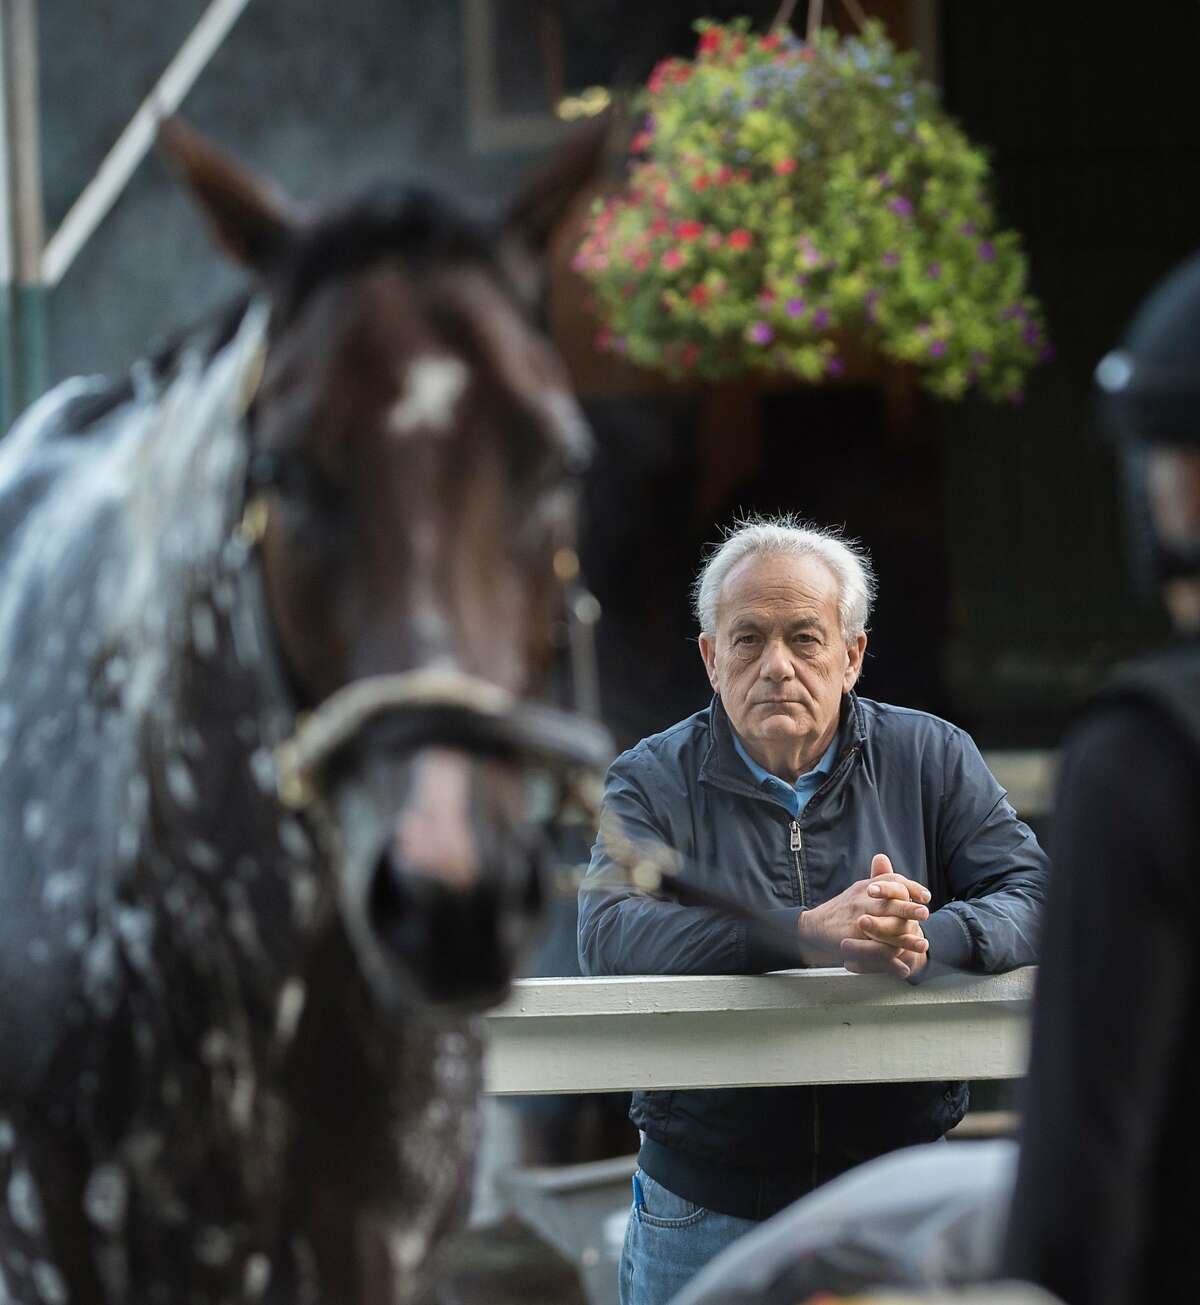 Trainer Jerry Hollendorfer watches his charge Personal Ensign entrant Songbird in the barn area of the Saratoga Race Course Thursday Aug. 24, 2017 in Rexford, N.Y. (Skip Dickstein/Times Union)